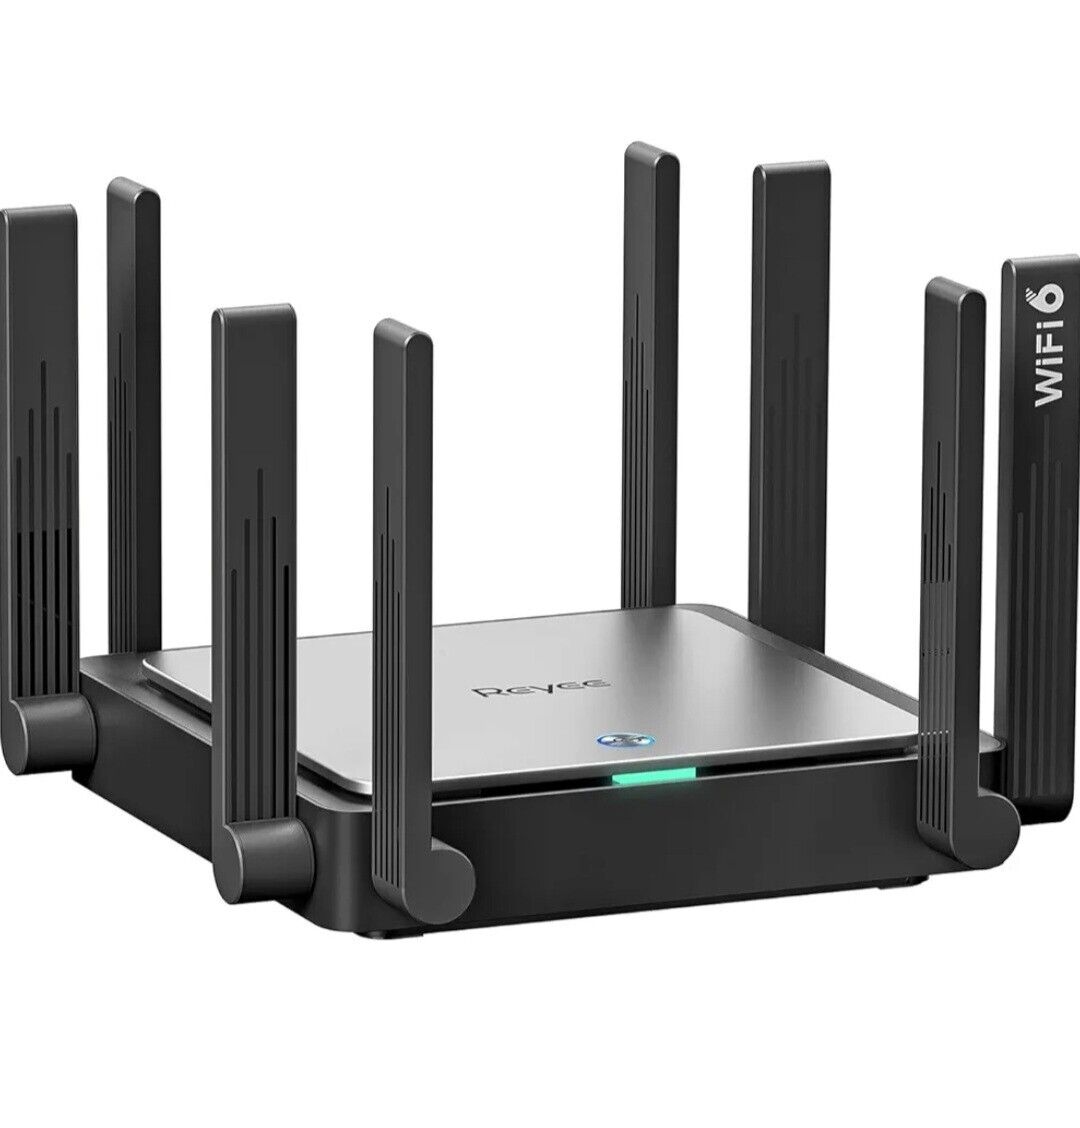 Reyee WiFi 6 Router AX3200 Wireless Smart Router High Speed Internet Gaming..